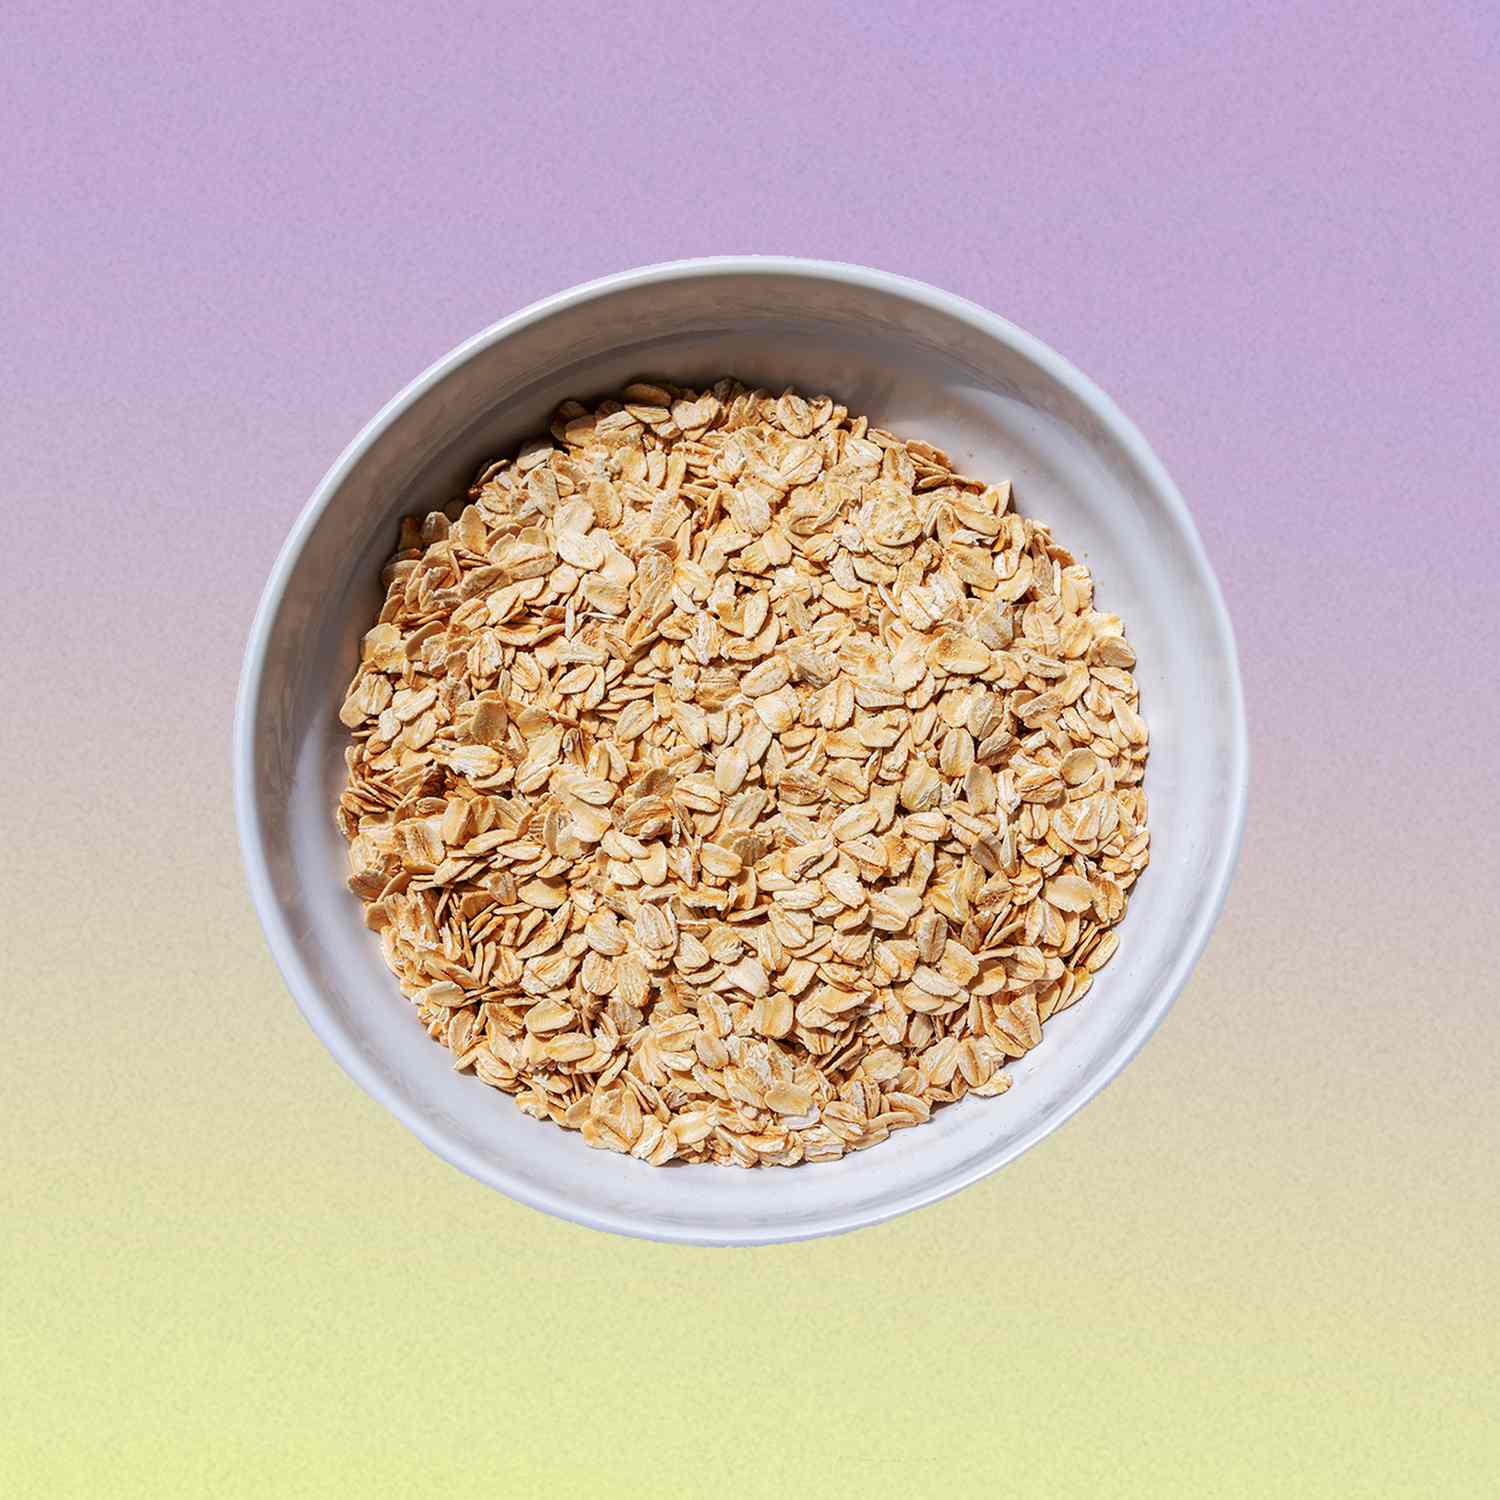 Are Oats Good For You? [Video]